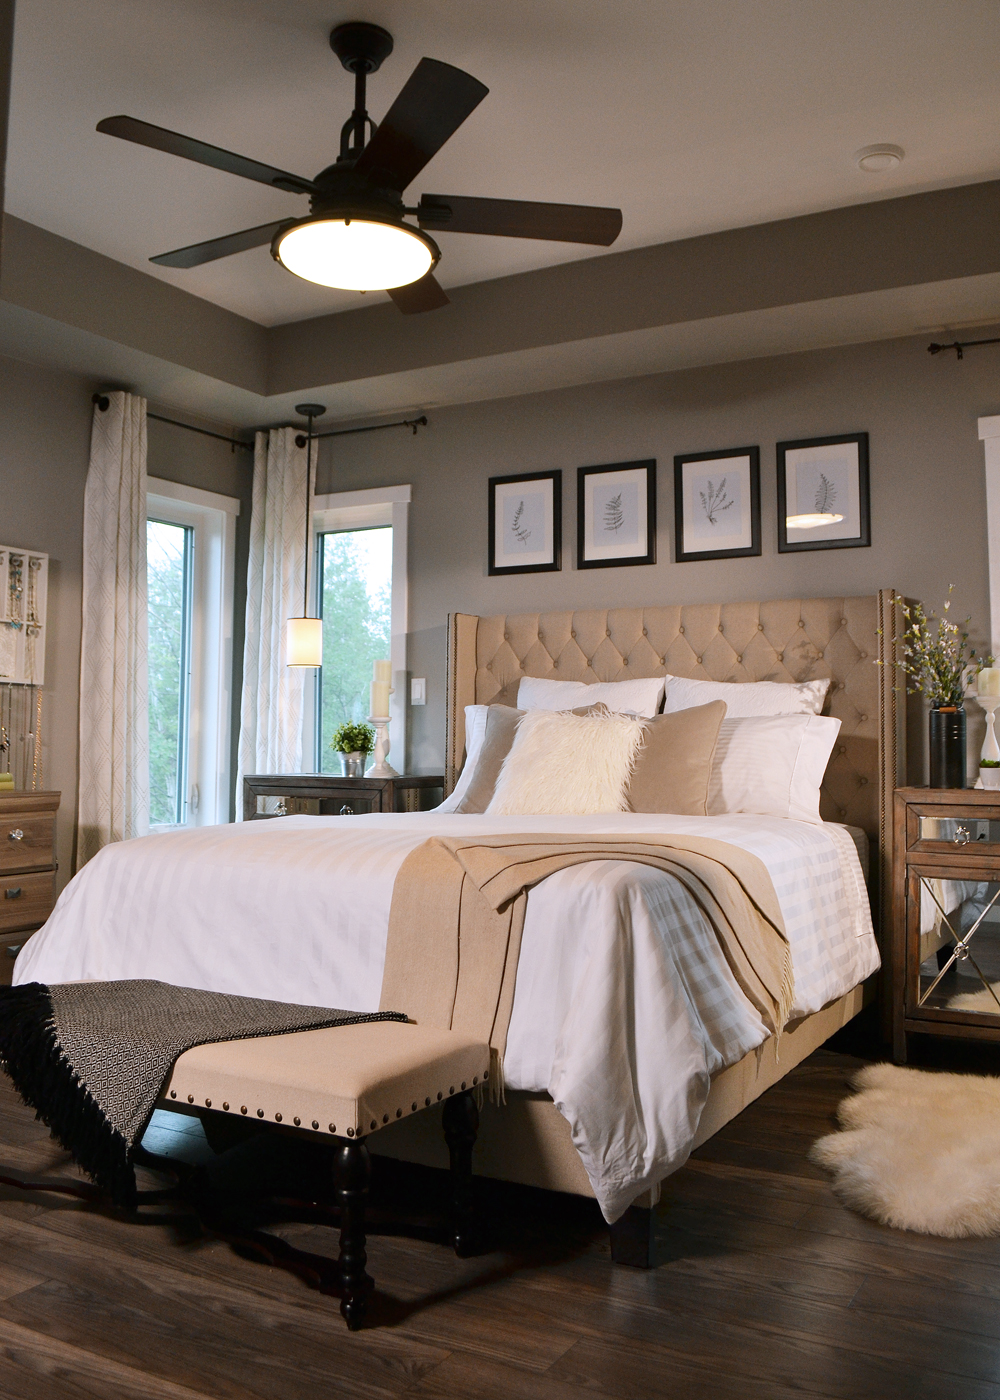 Traditional Glam Bedroom design with thrifty finds